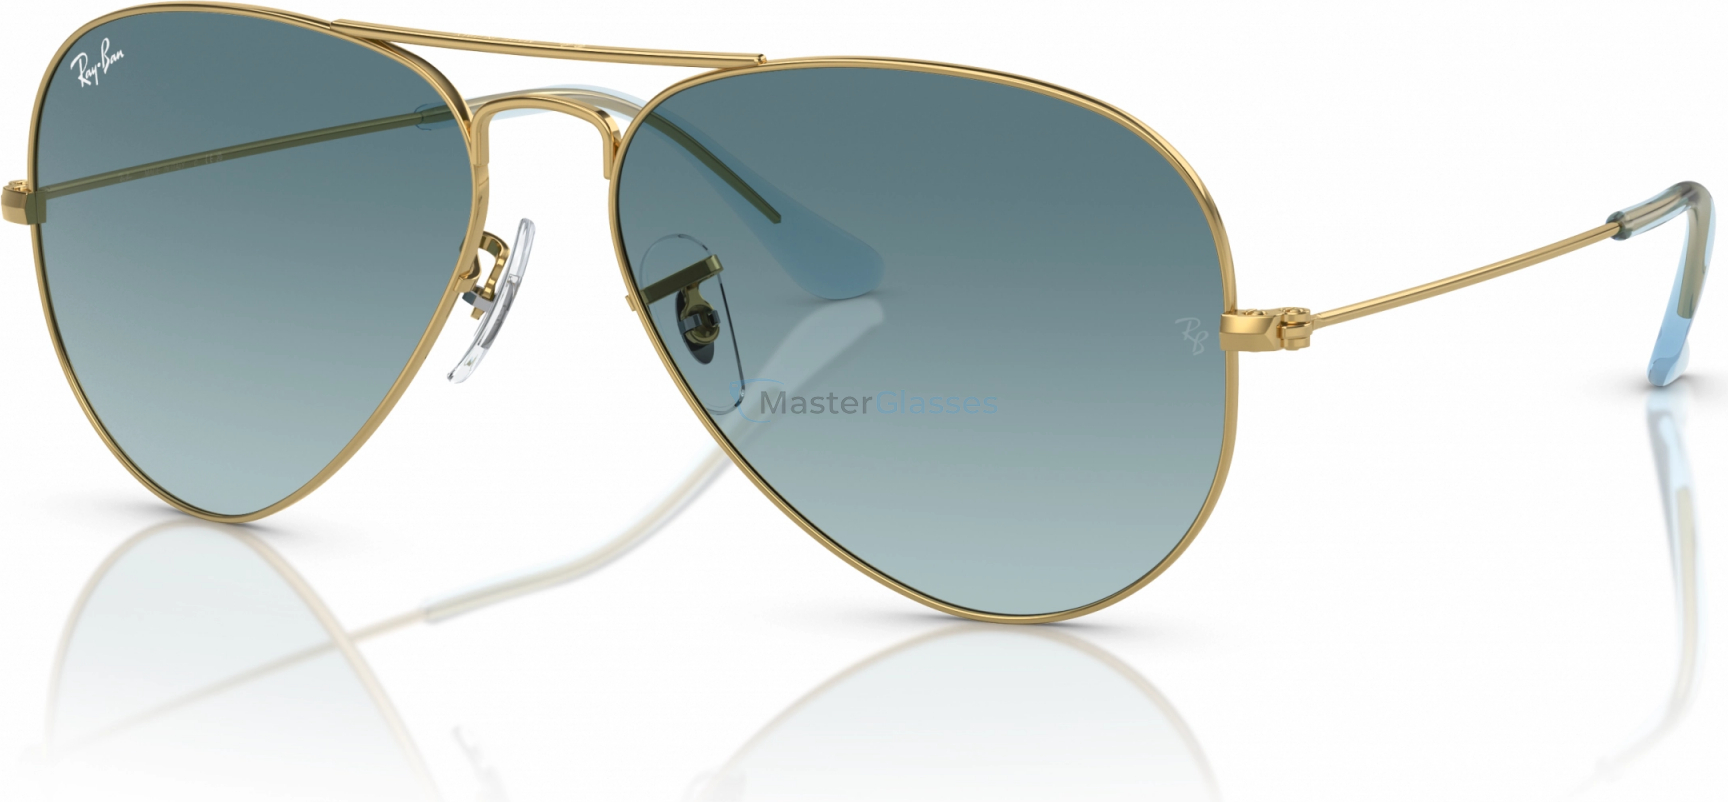   Ray-Ban AVIATOR RB3025 001/3M Gold